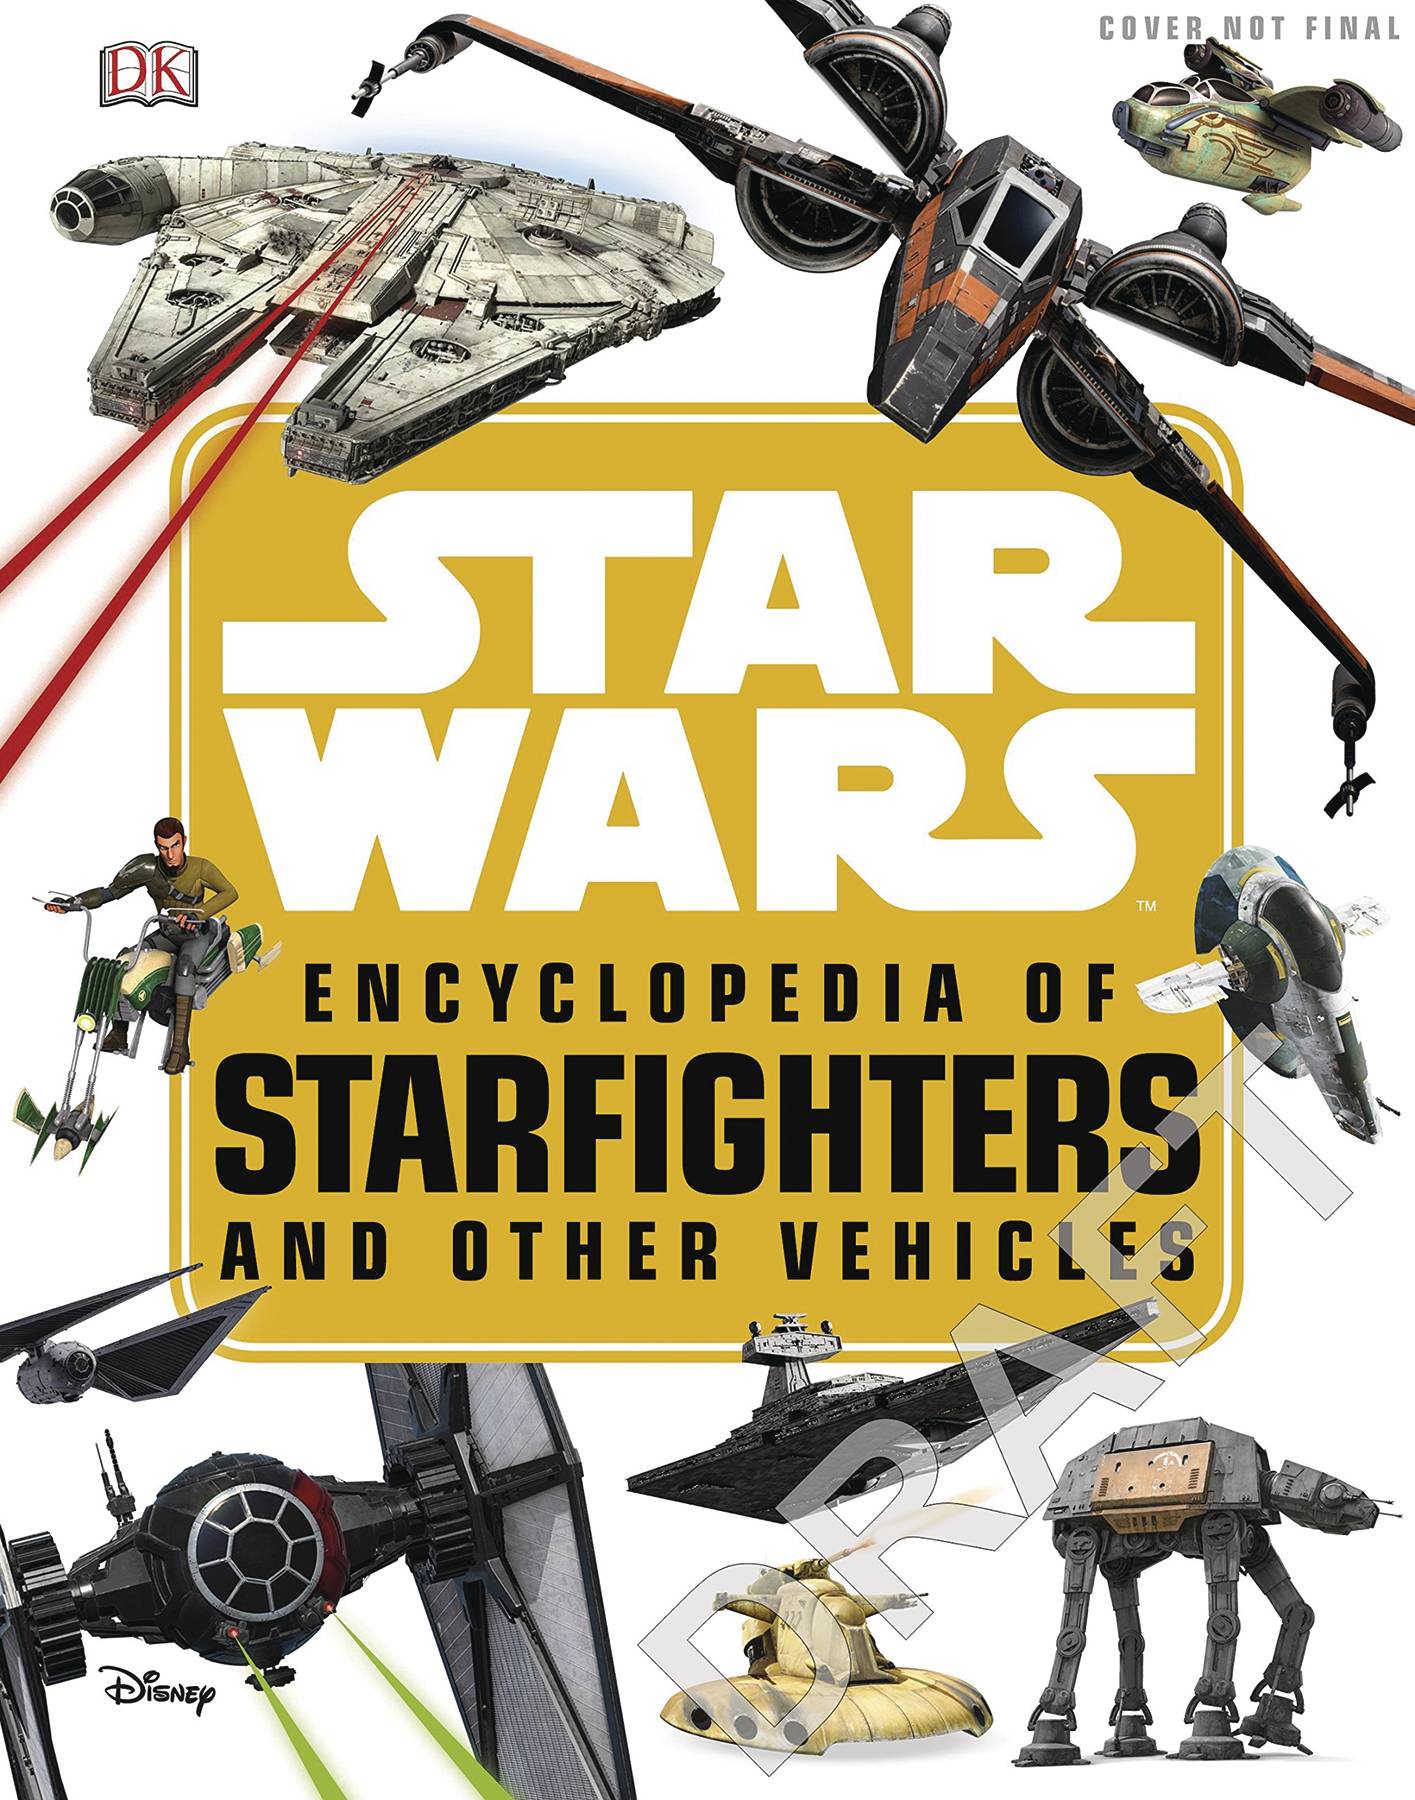 Star Wars Encyclopedia Starfighters & Other Vehicles Hardcover